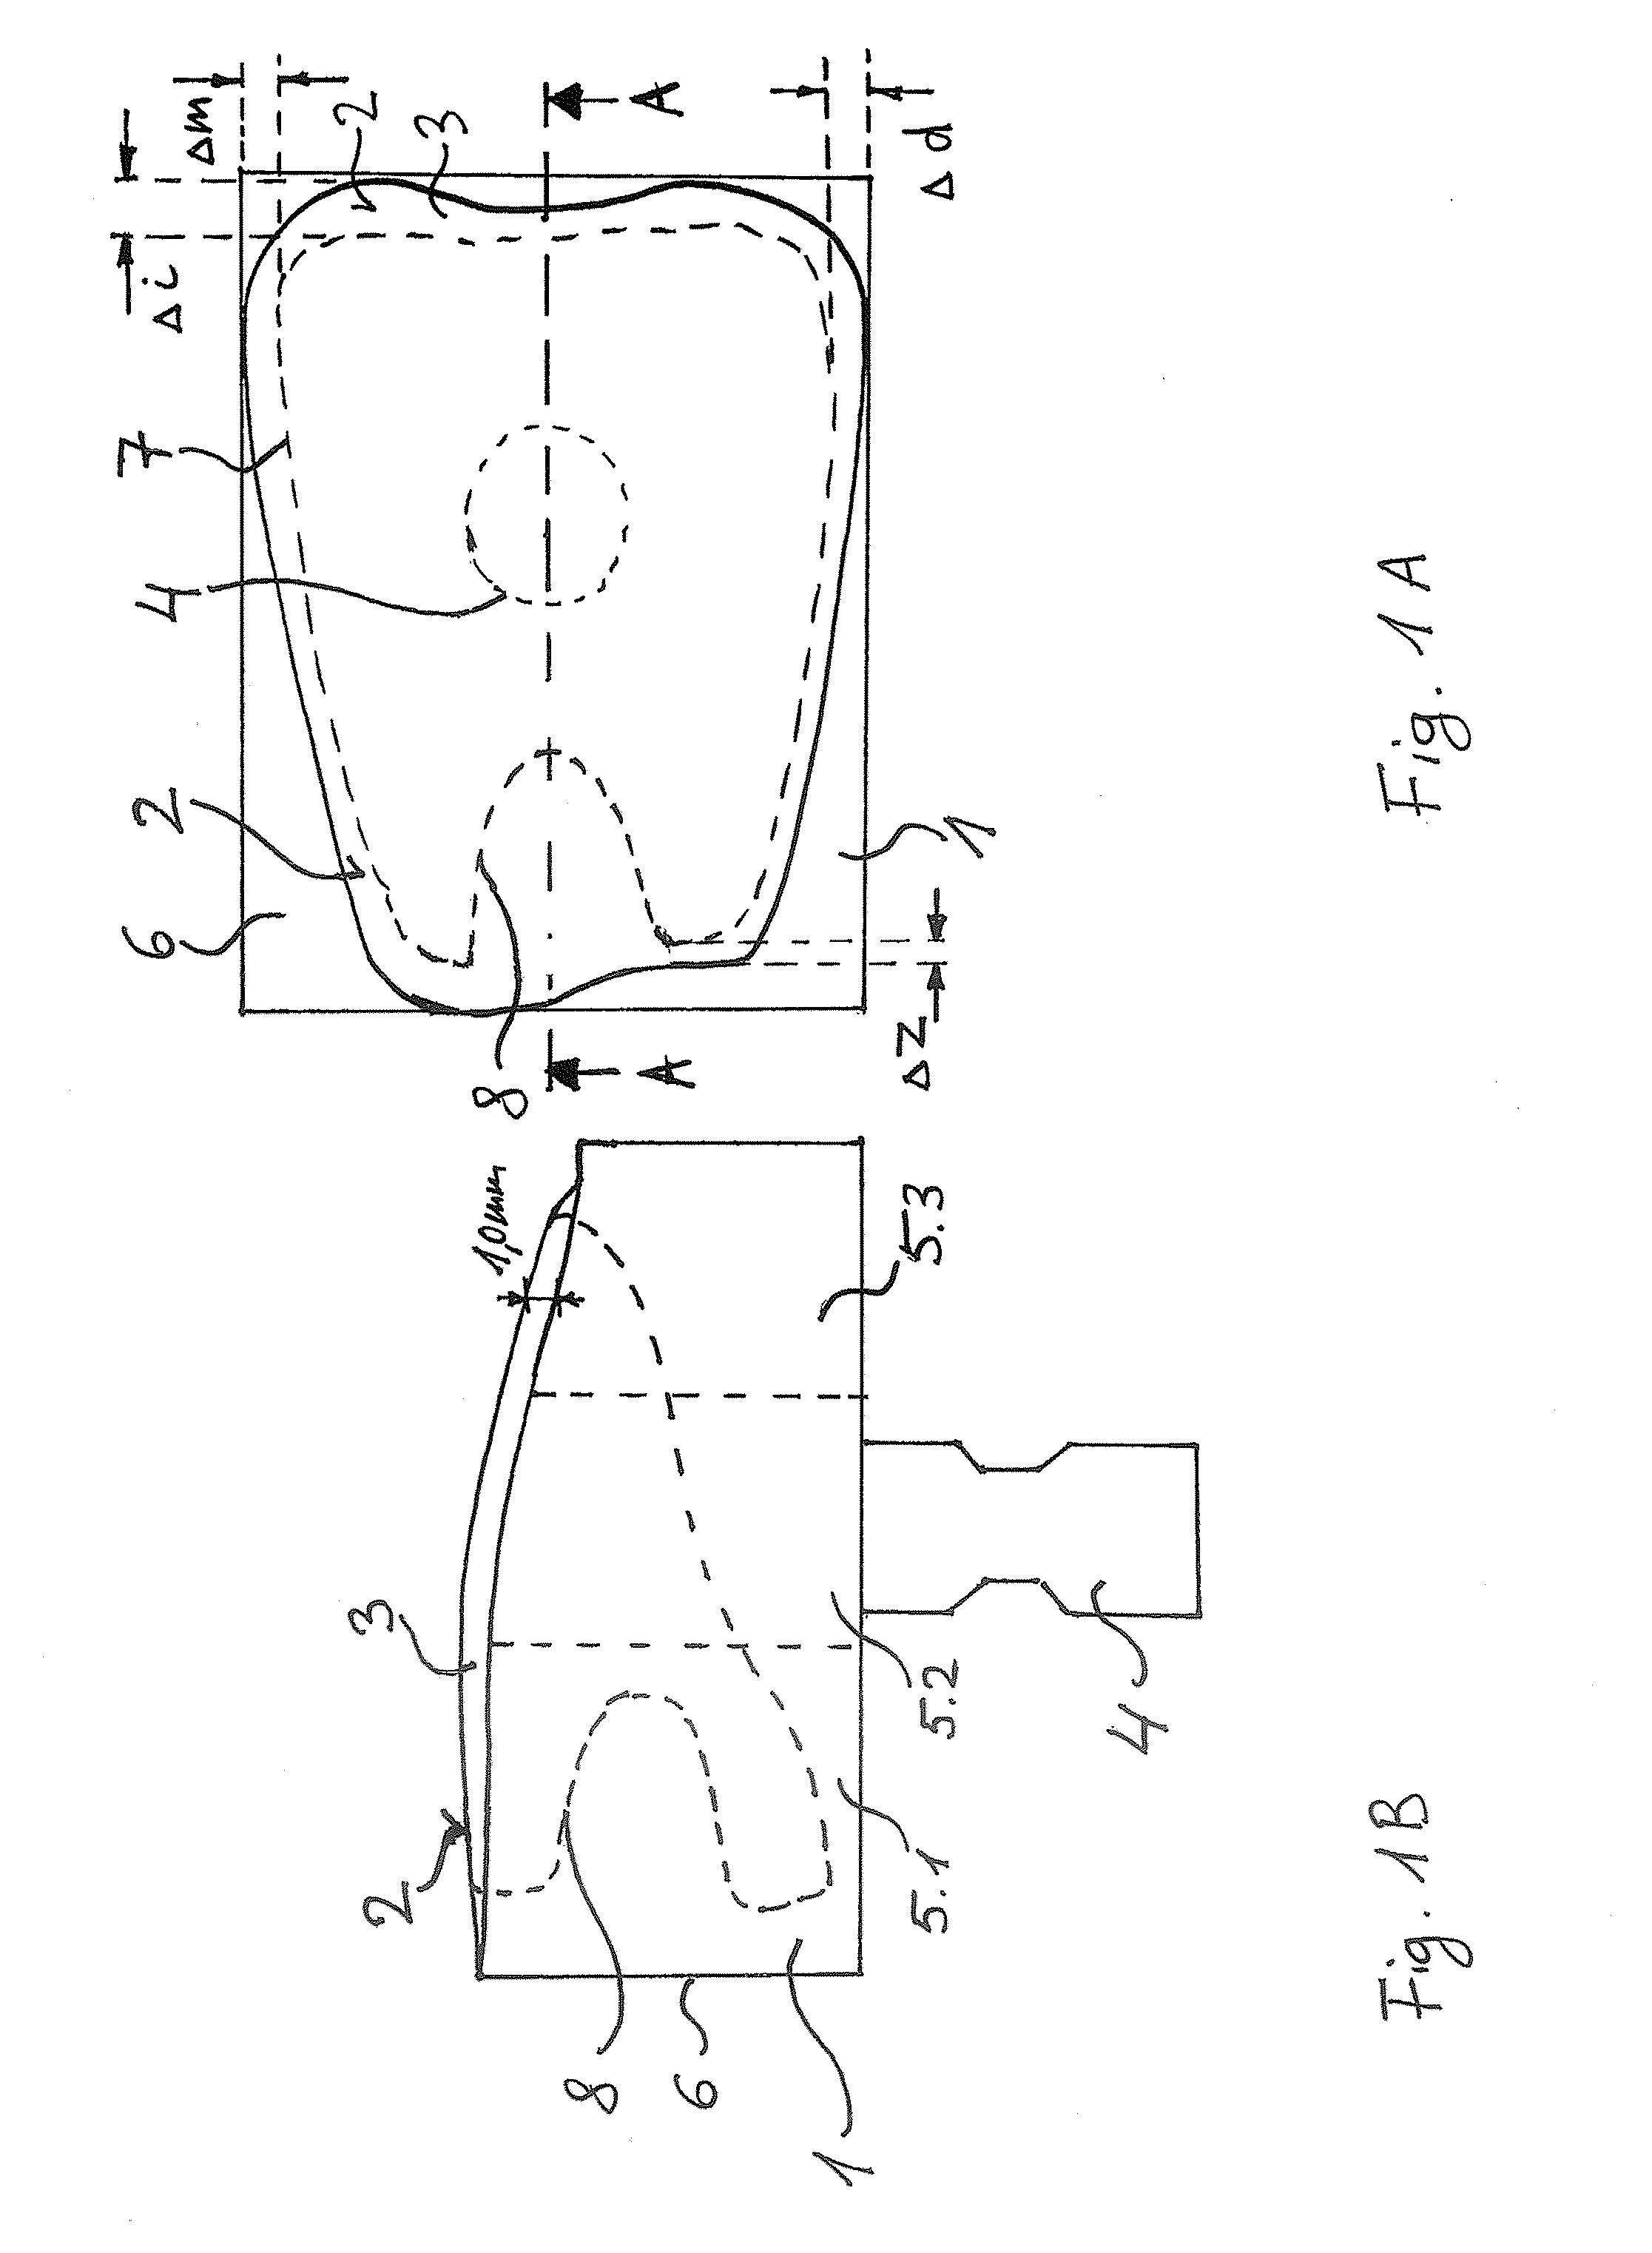 Blank and database of prefabricated partial surfaces of dental prosthetics